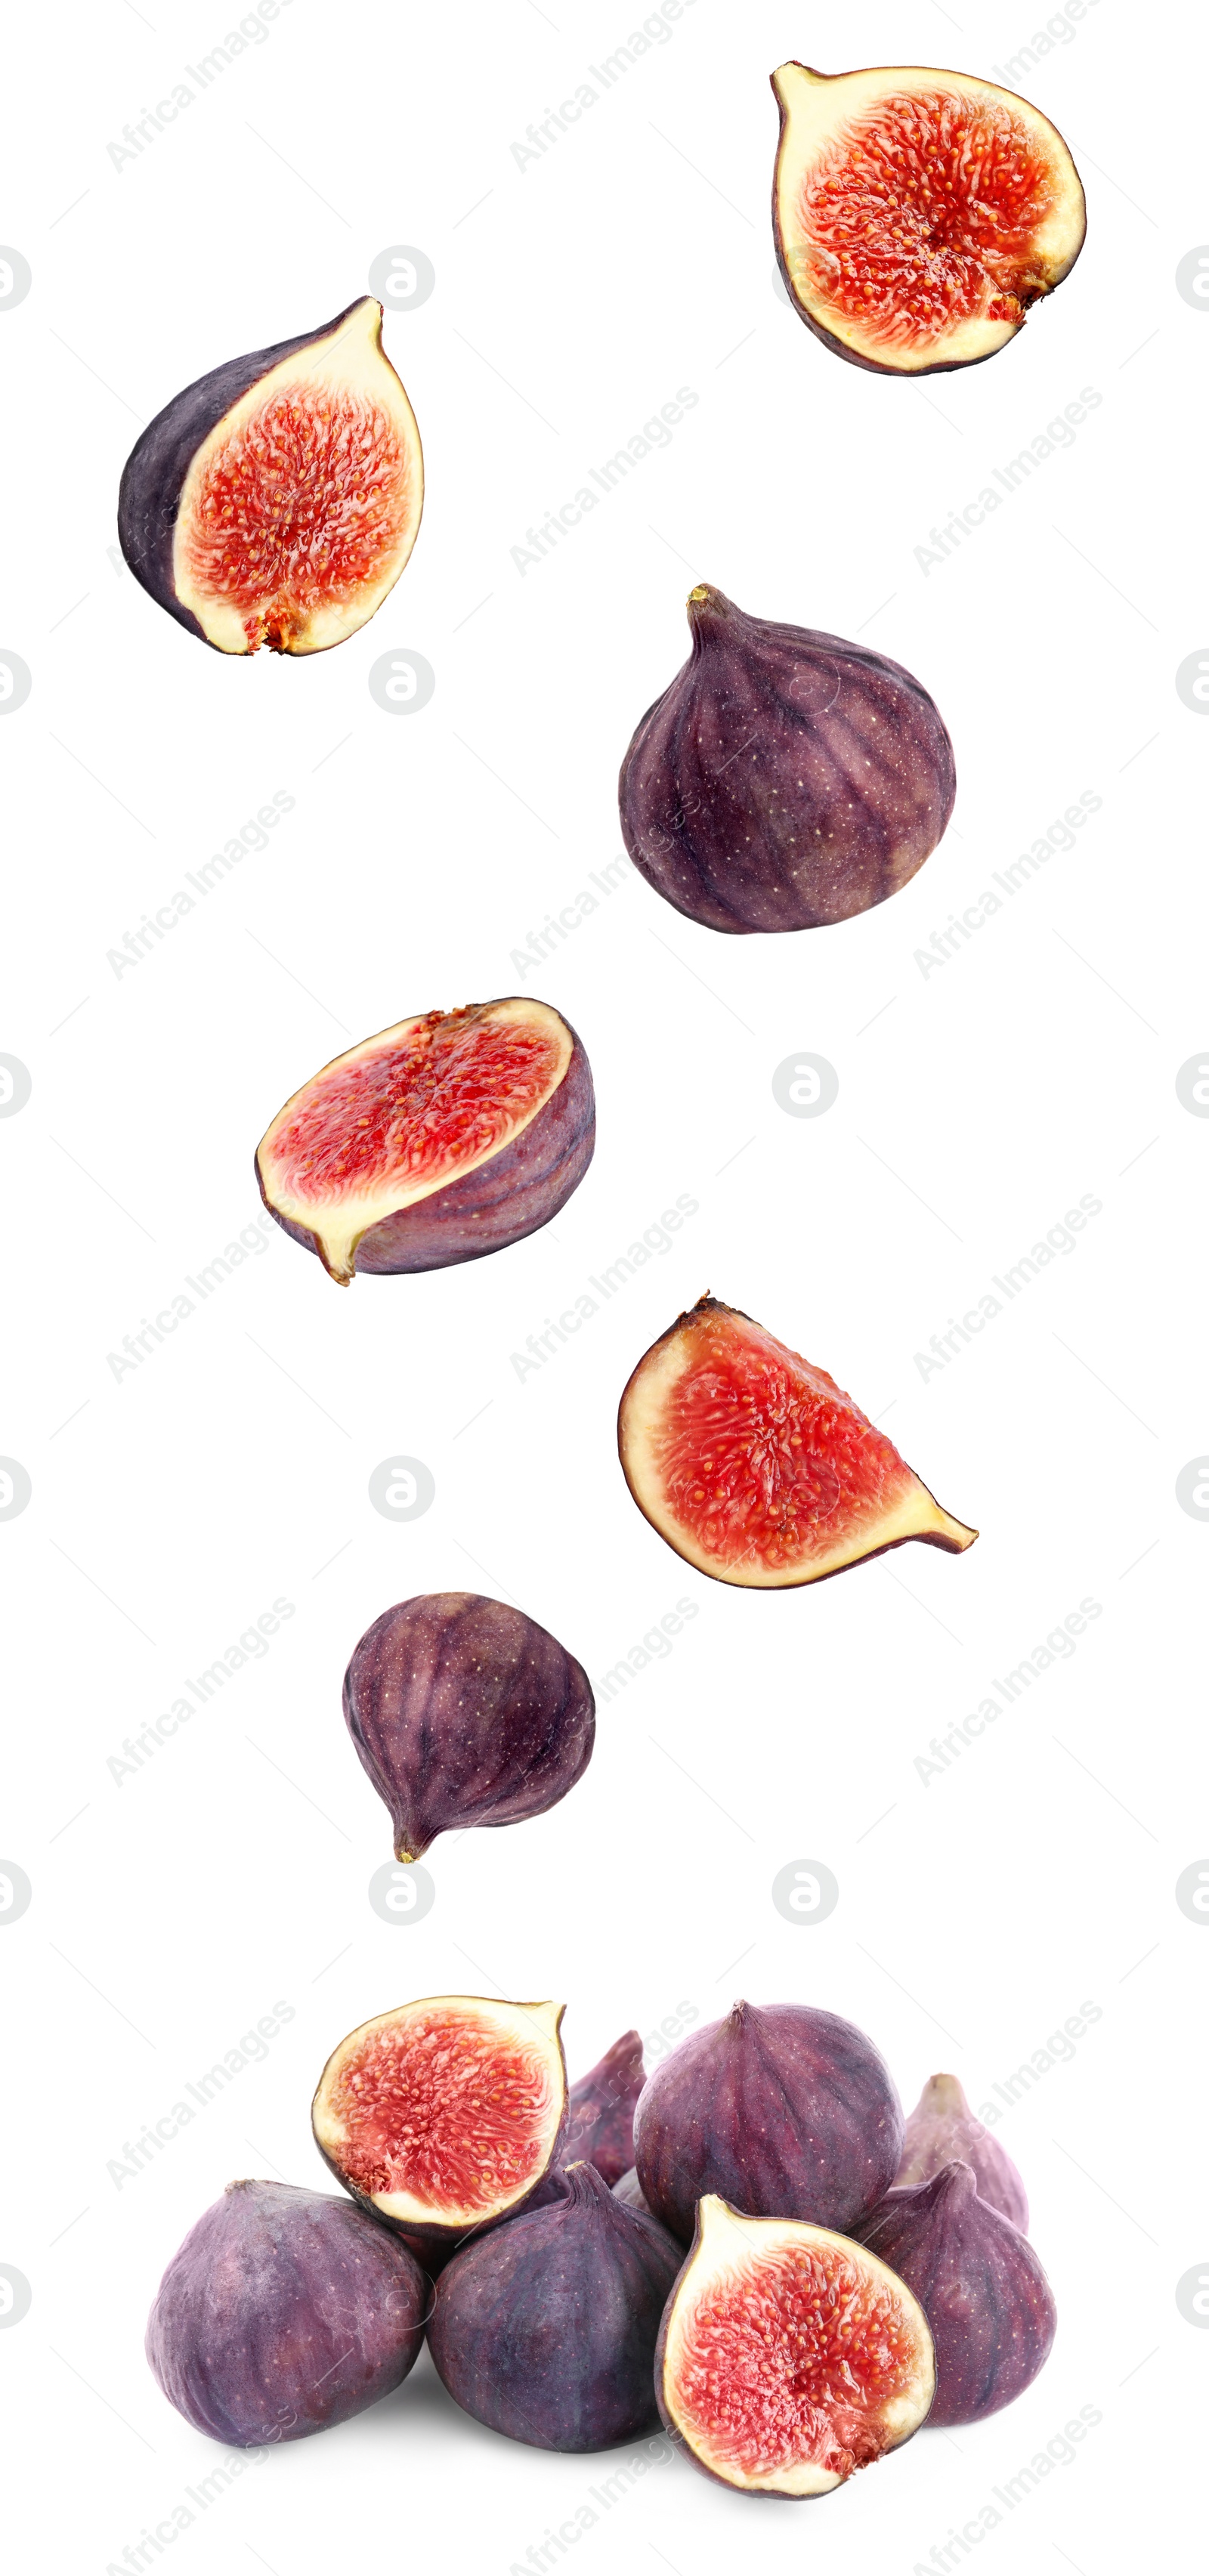 Image of Cut and whole figs falling on white background